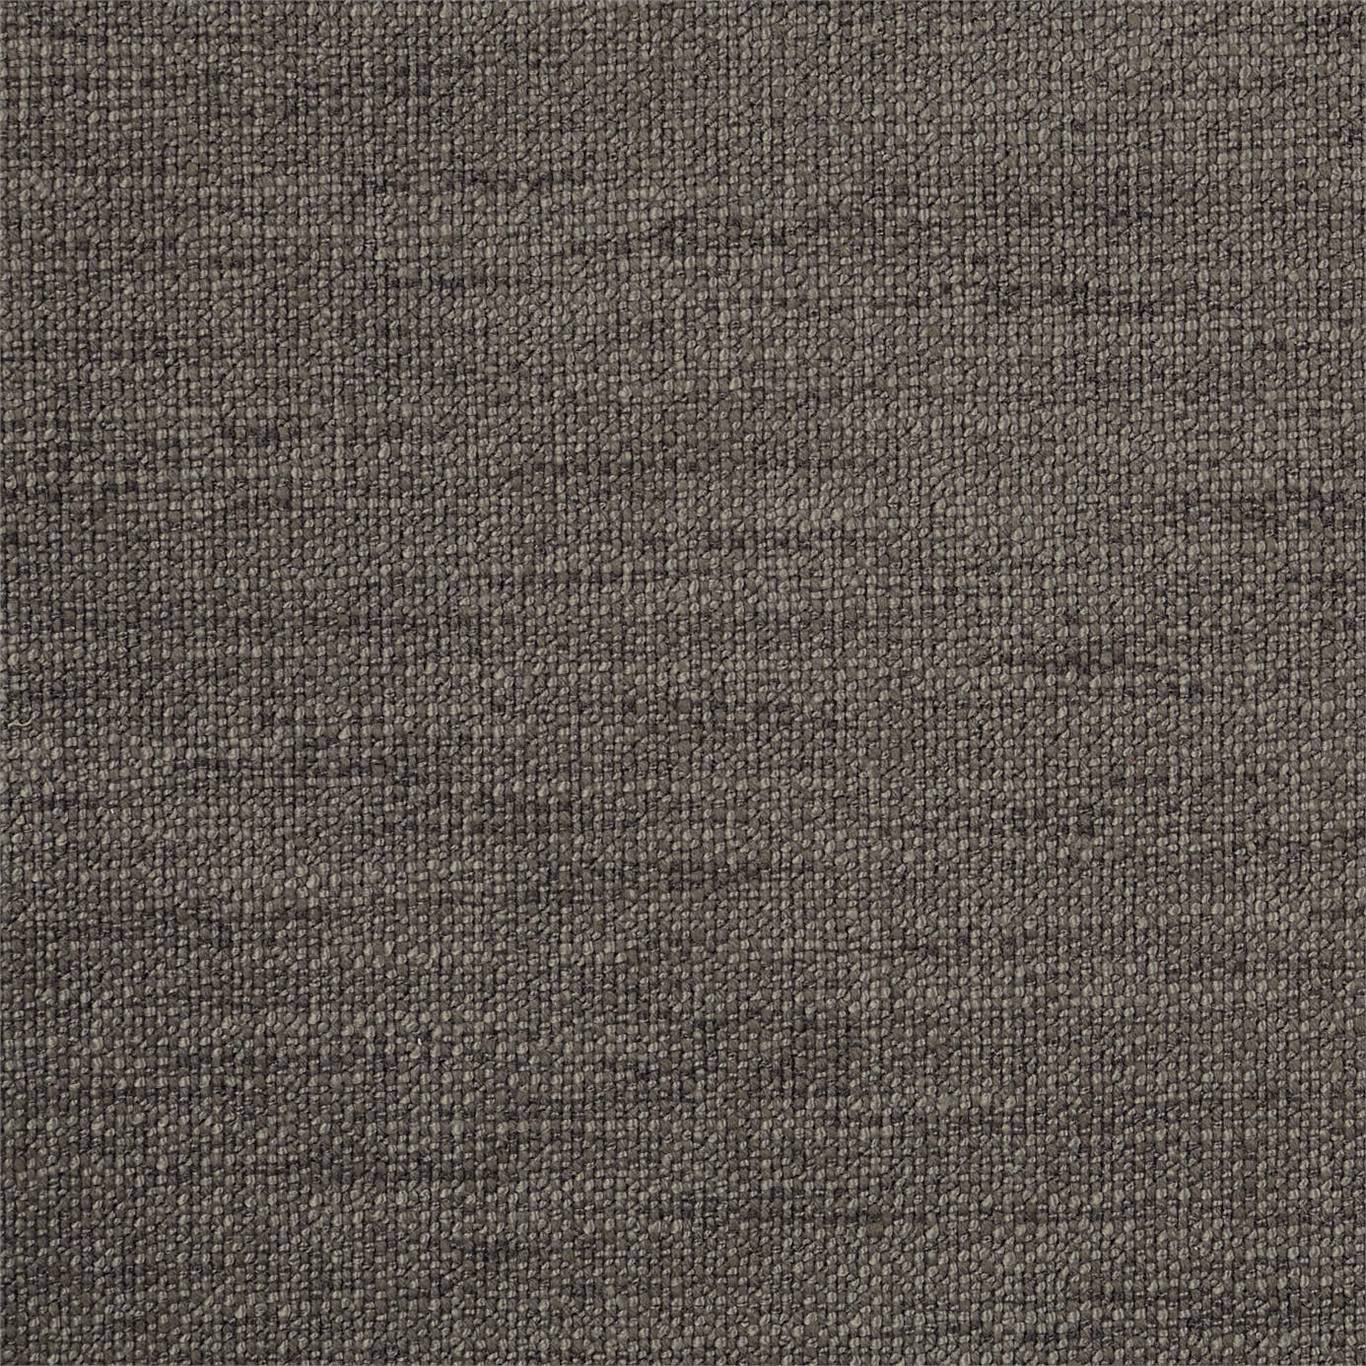 Subject Graphite Fabric by HAR